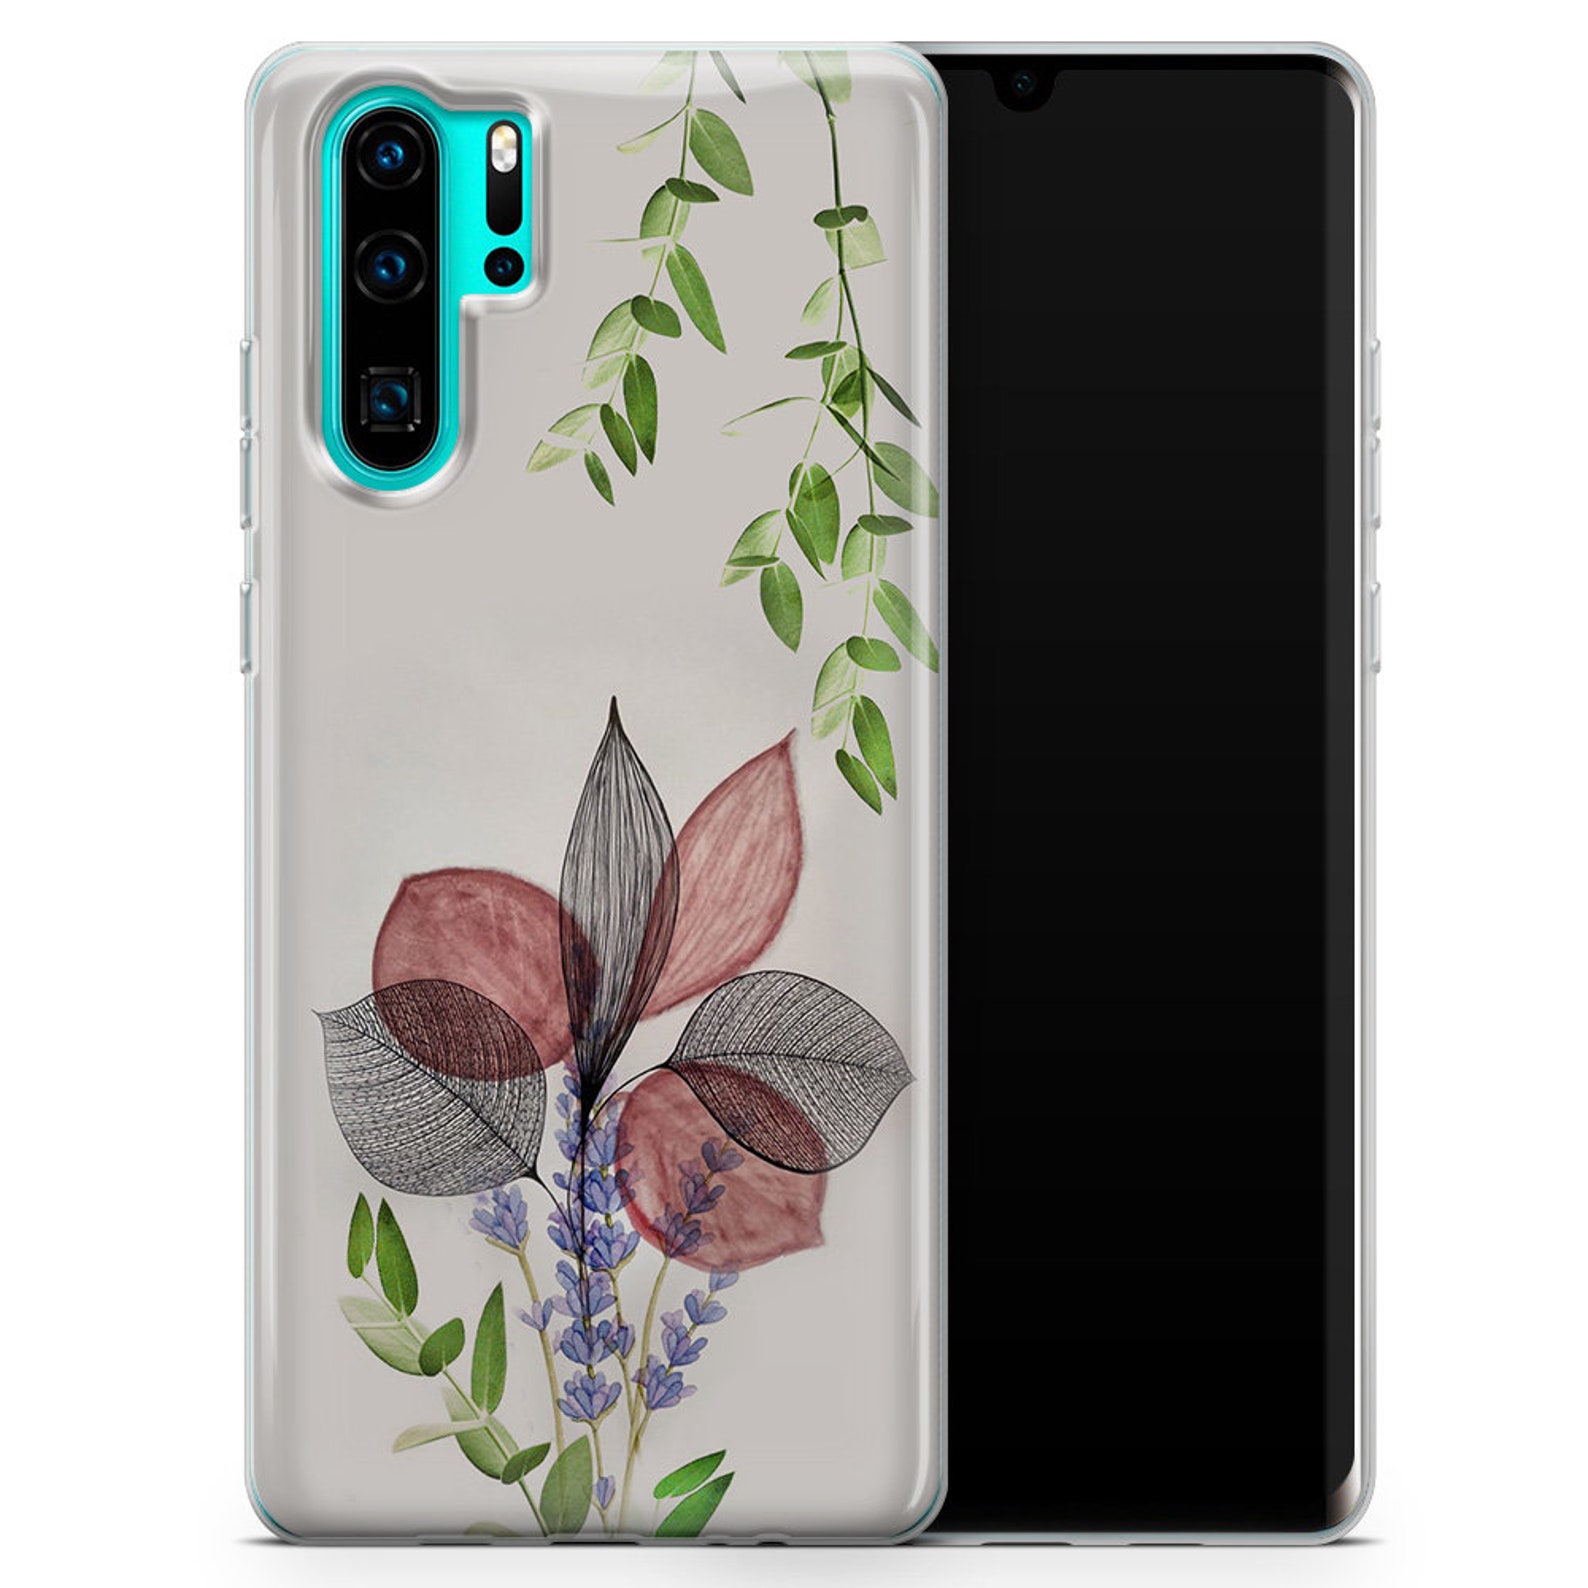 Aesthetic Floral Phone Case fit for Huawei Mate 20 Huawei Mate | Etsy